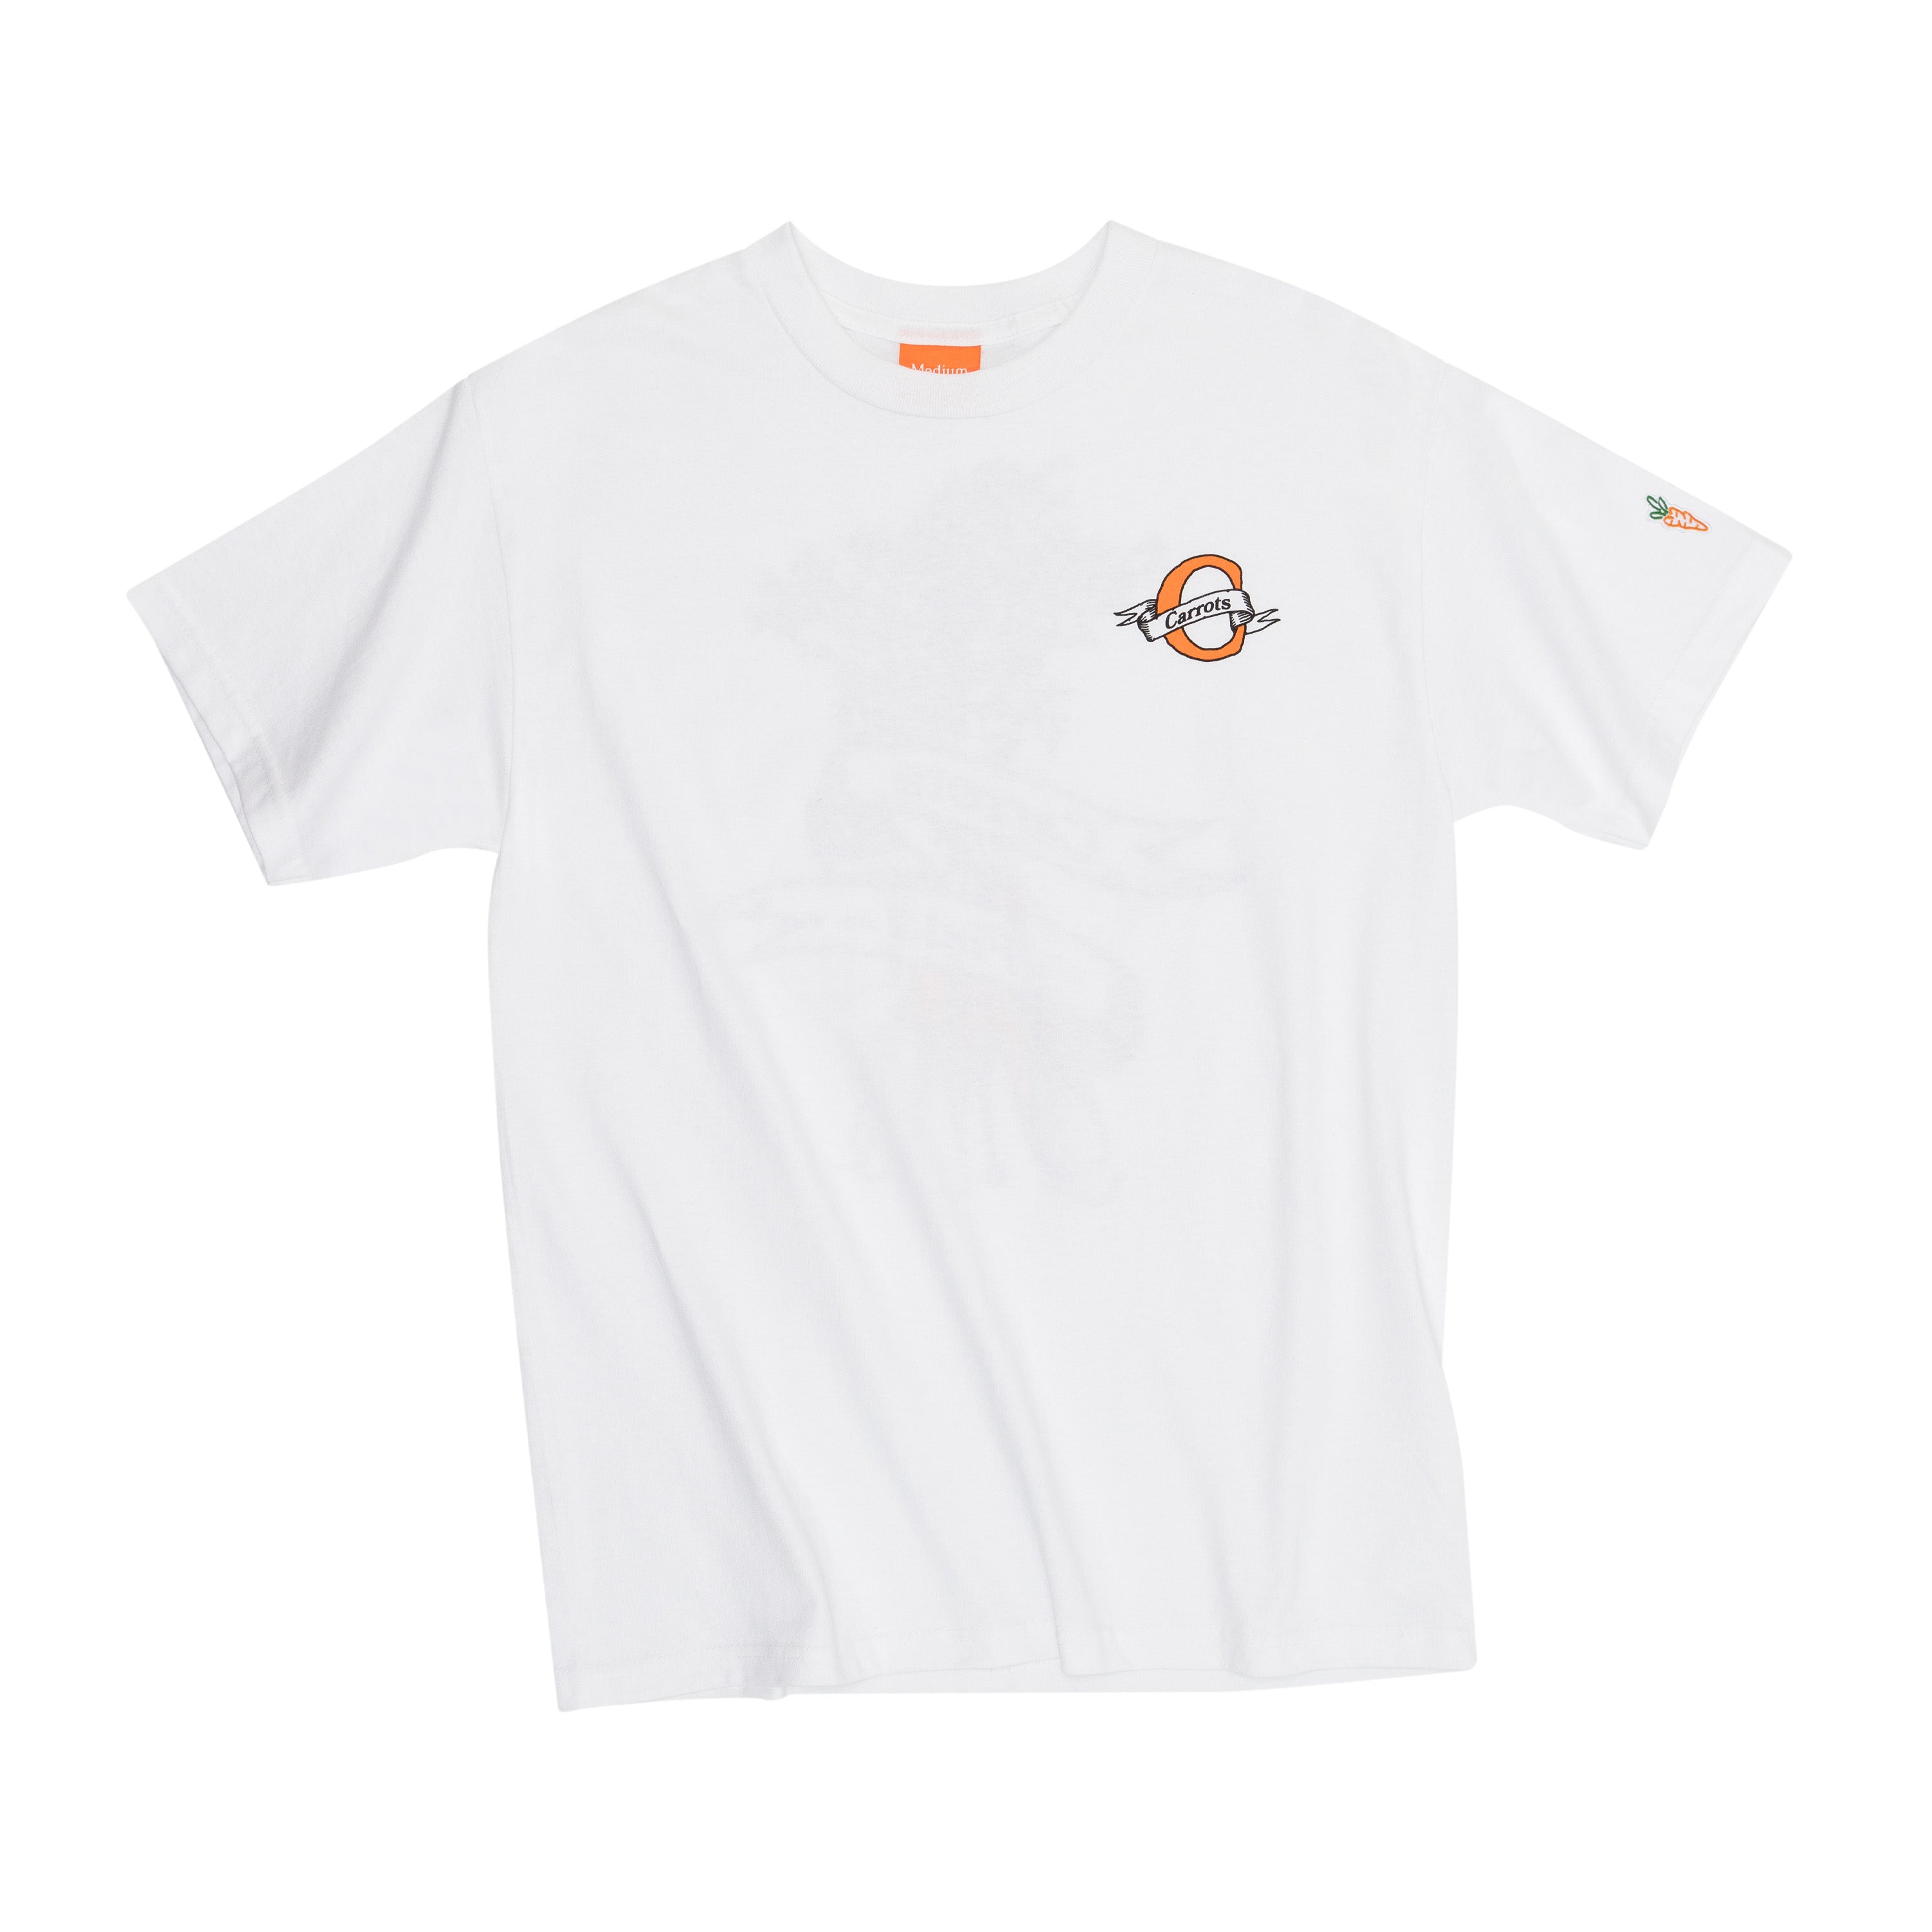 BANNER TEE - WHITE HOLIDAY Anwar | – Carrots QS Anwar Carrots by Carrots Carrots 23\' By 